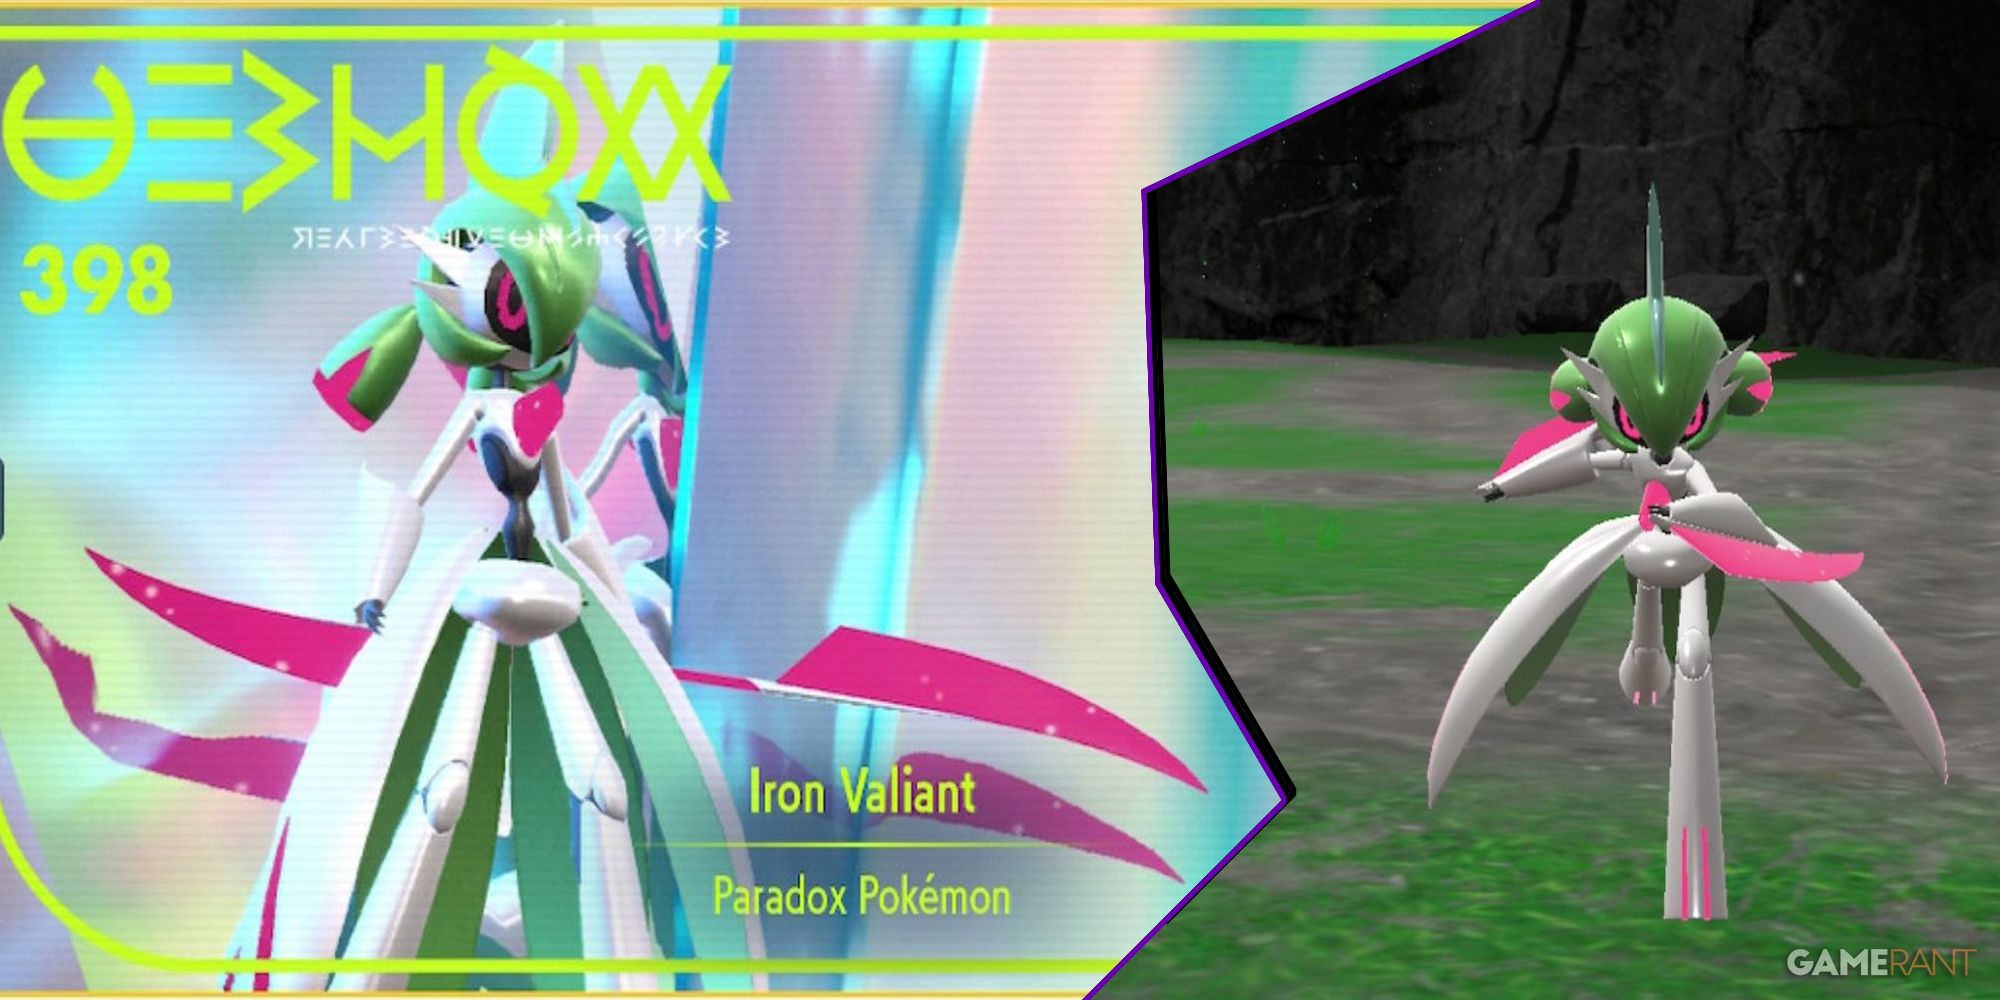 HOW TO GET GARDEVOIR ON POKEMON SCARLET AND VIOLET 